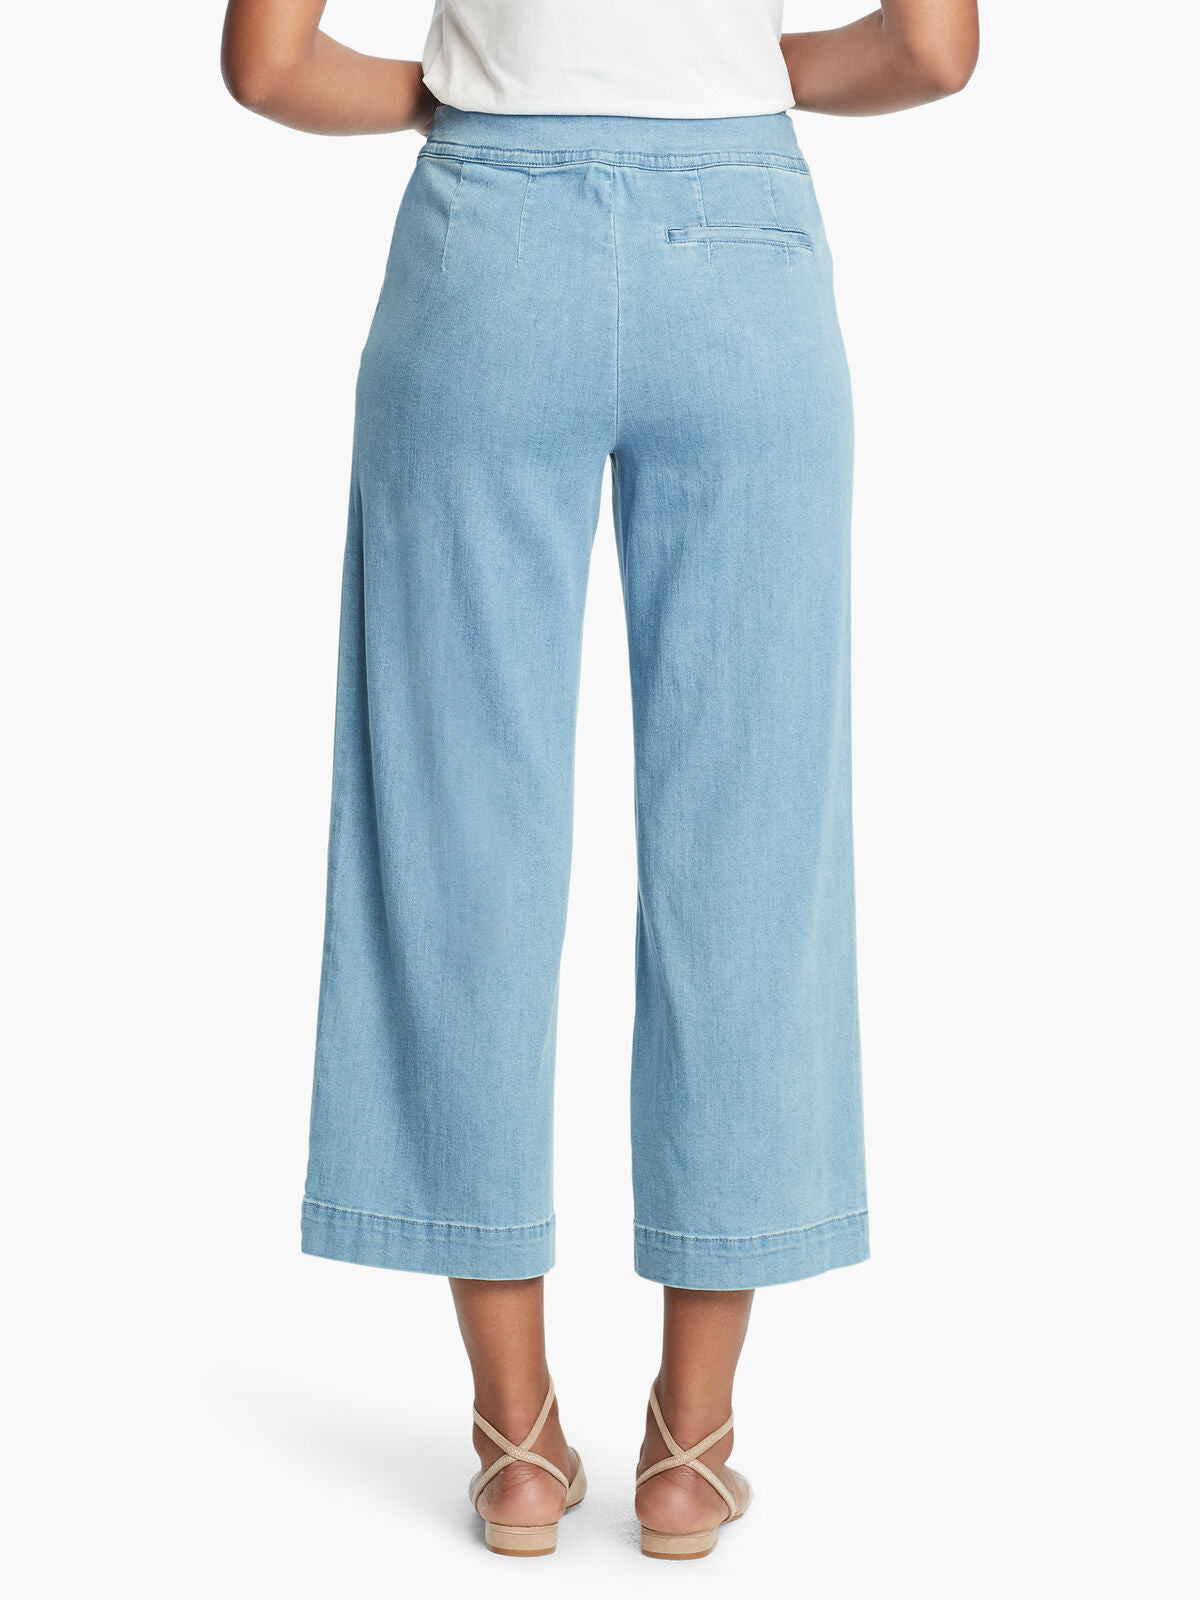 Back, bottom half view of a woman wearing a white top and the Nic + Zoe Summer day denim pant. These light wash jeans are wide legged and cropped. The back of these pants feature a pocket on the right side.